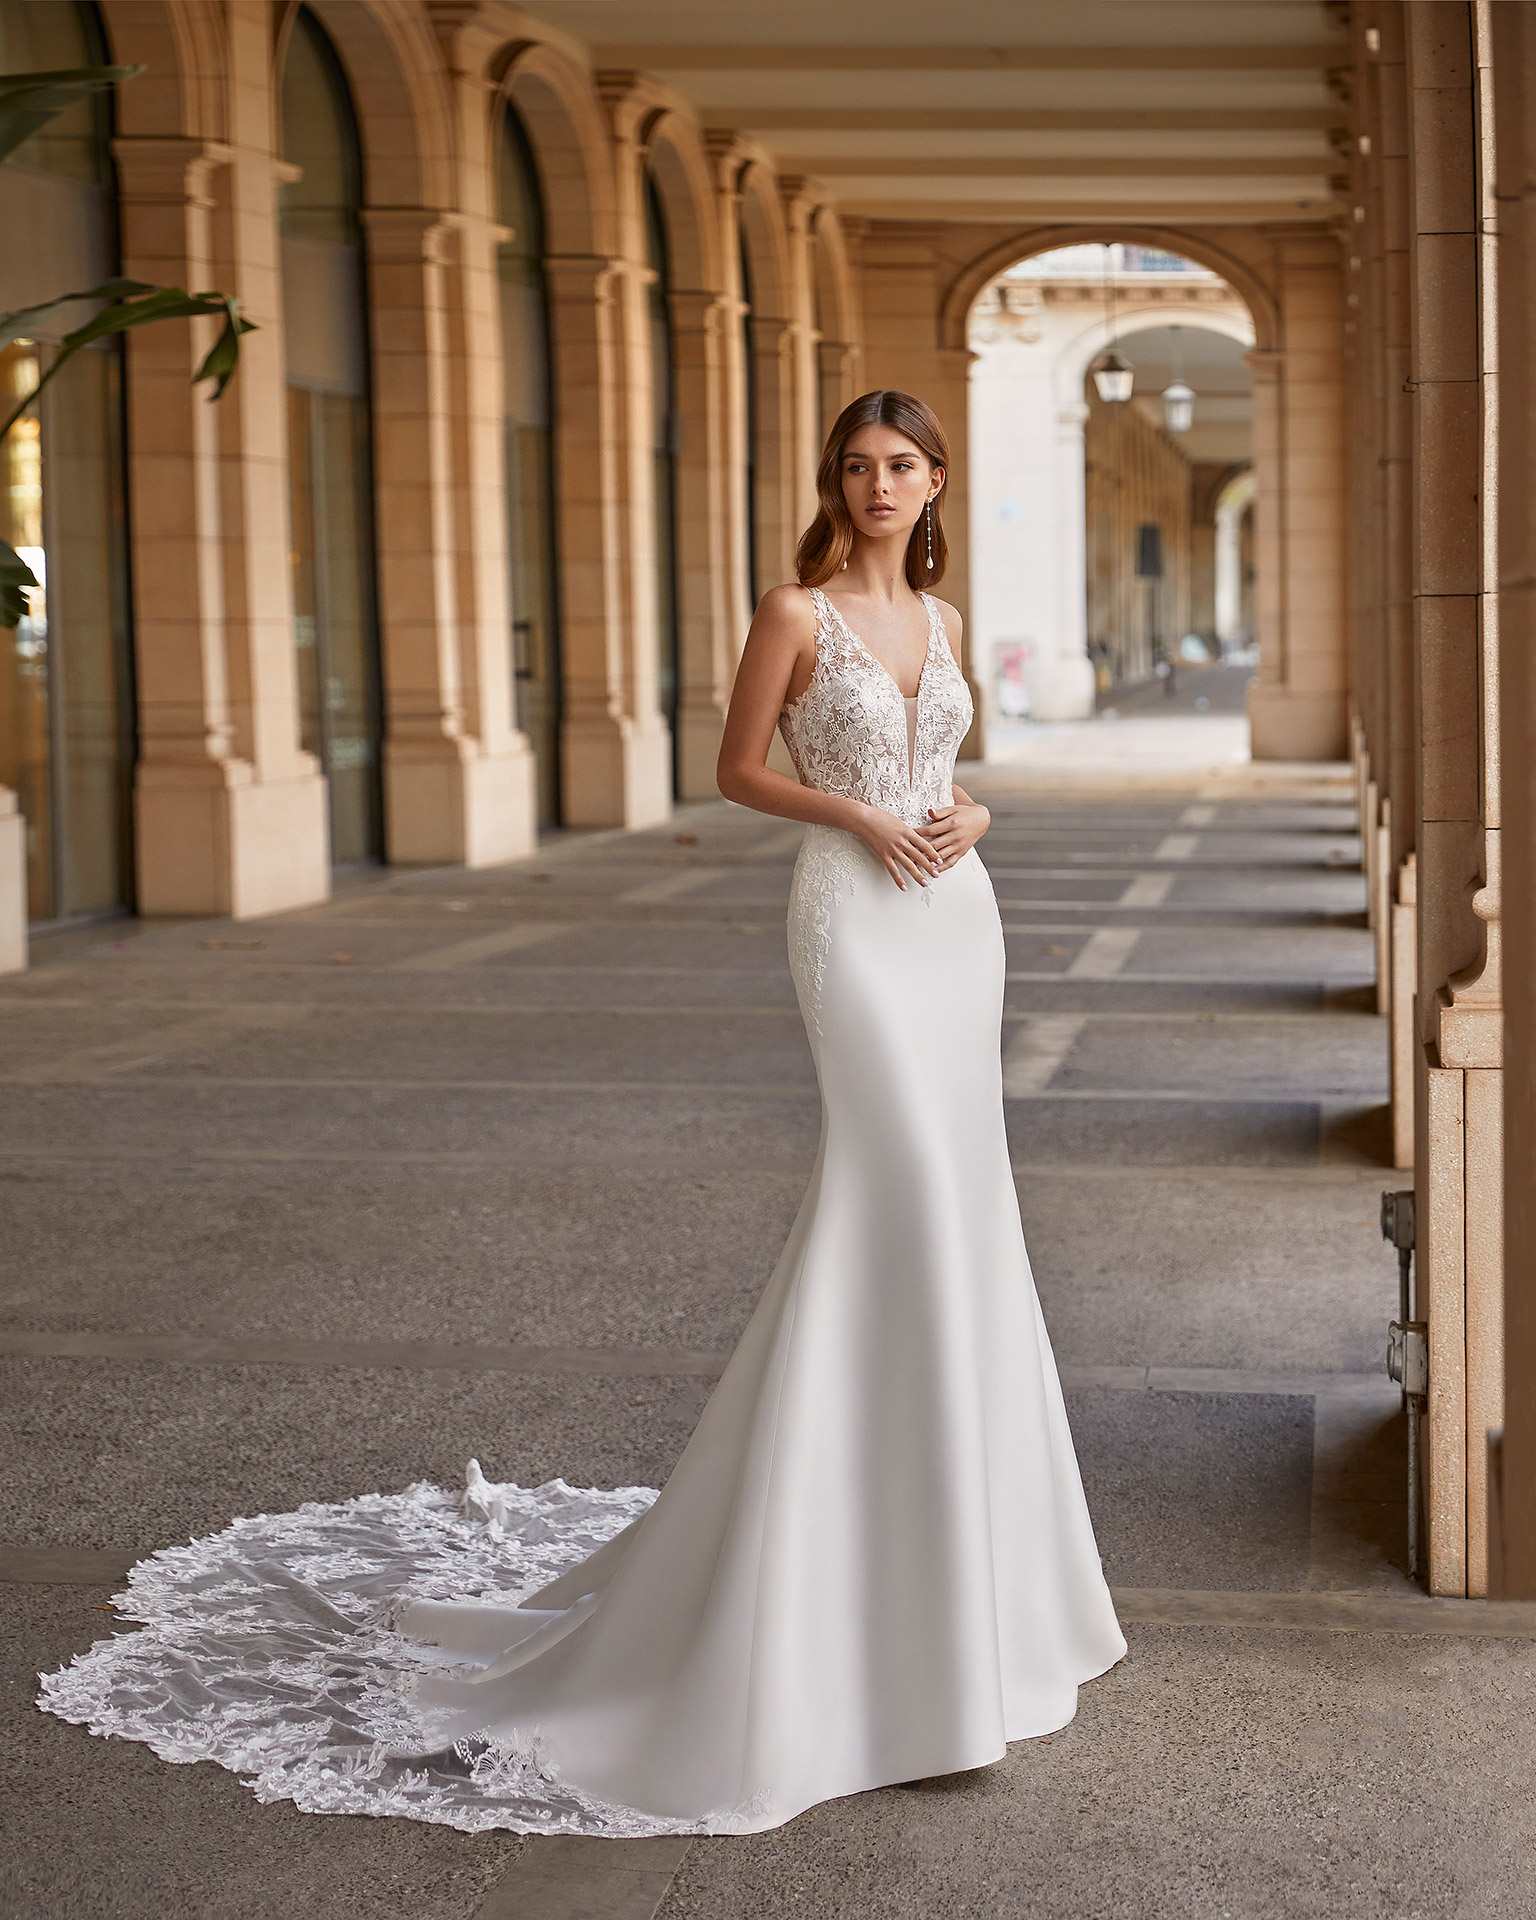 Romantic ballgown-style wedding dress, made of matt Mikado, with a sheath-style buttoned skirt throughout the train; with a deep-plunge neckline and a plunging lace back. Delicate Luna Novias outfit made of matt Mikado and lace. LUNA_NOVIAS.